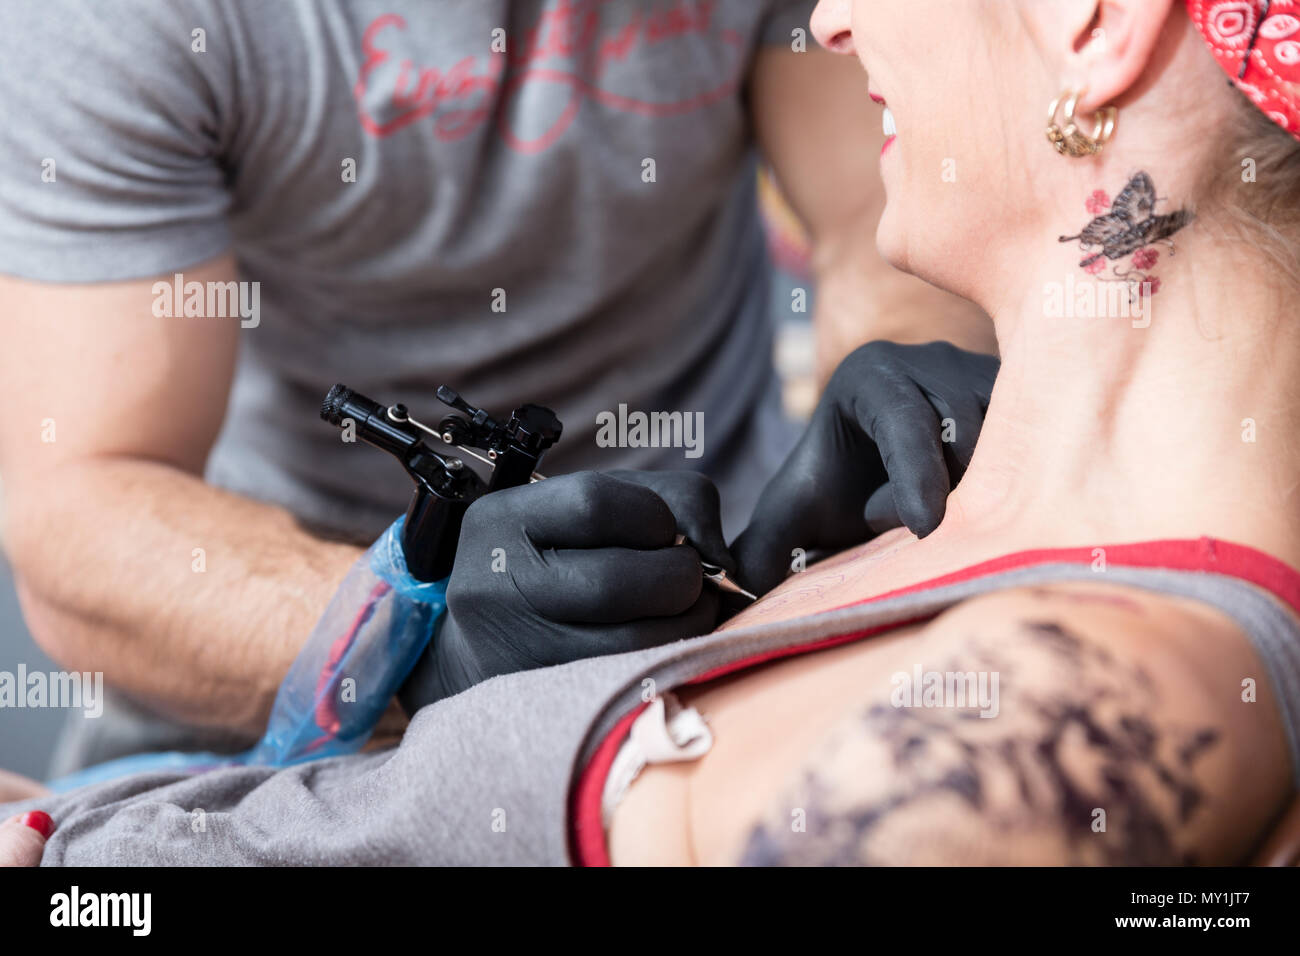 Skilled artist making the contour of a new tattoo on the skin of a client Stock Photo